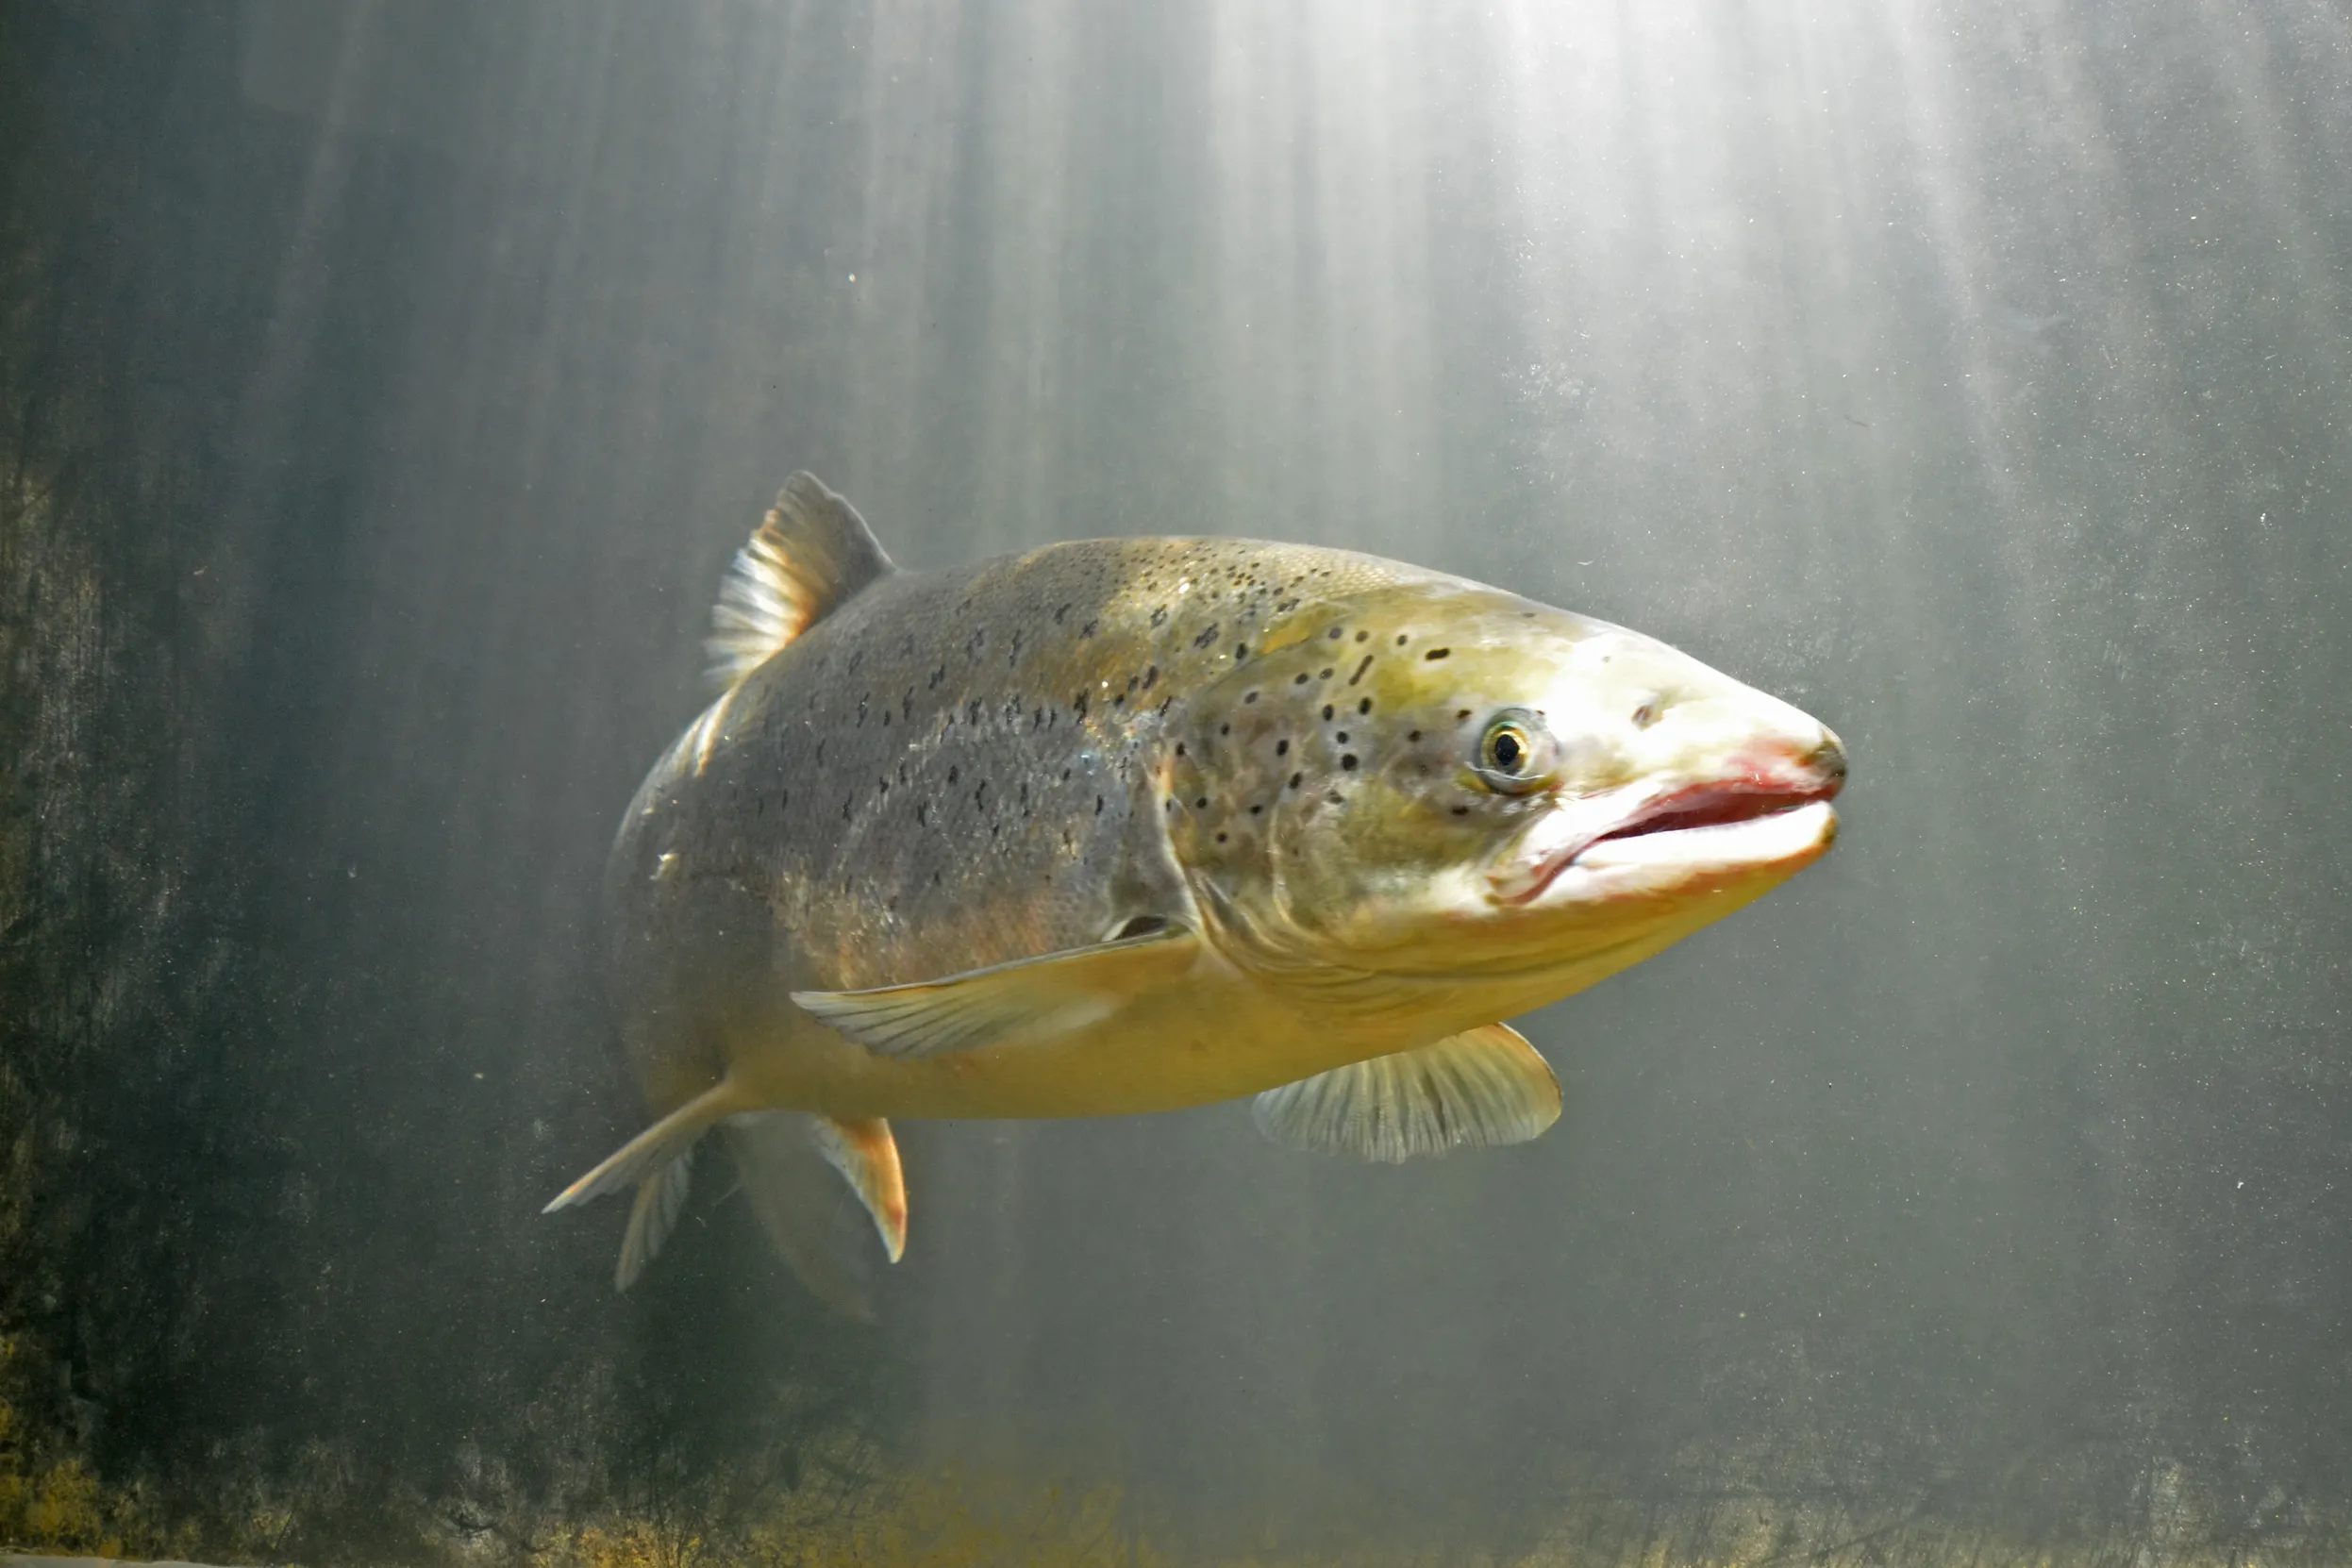 A Salmon swimming towards the camera with a ray of sunlight shinning through the top of the water.